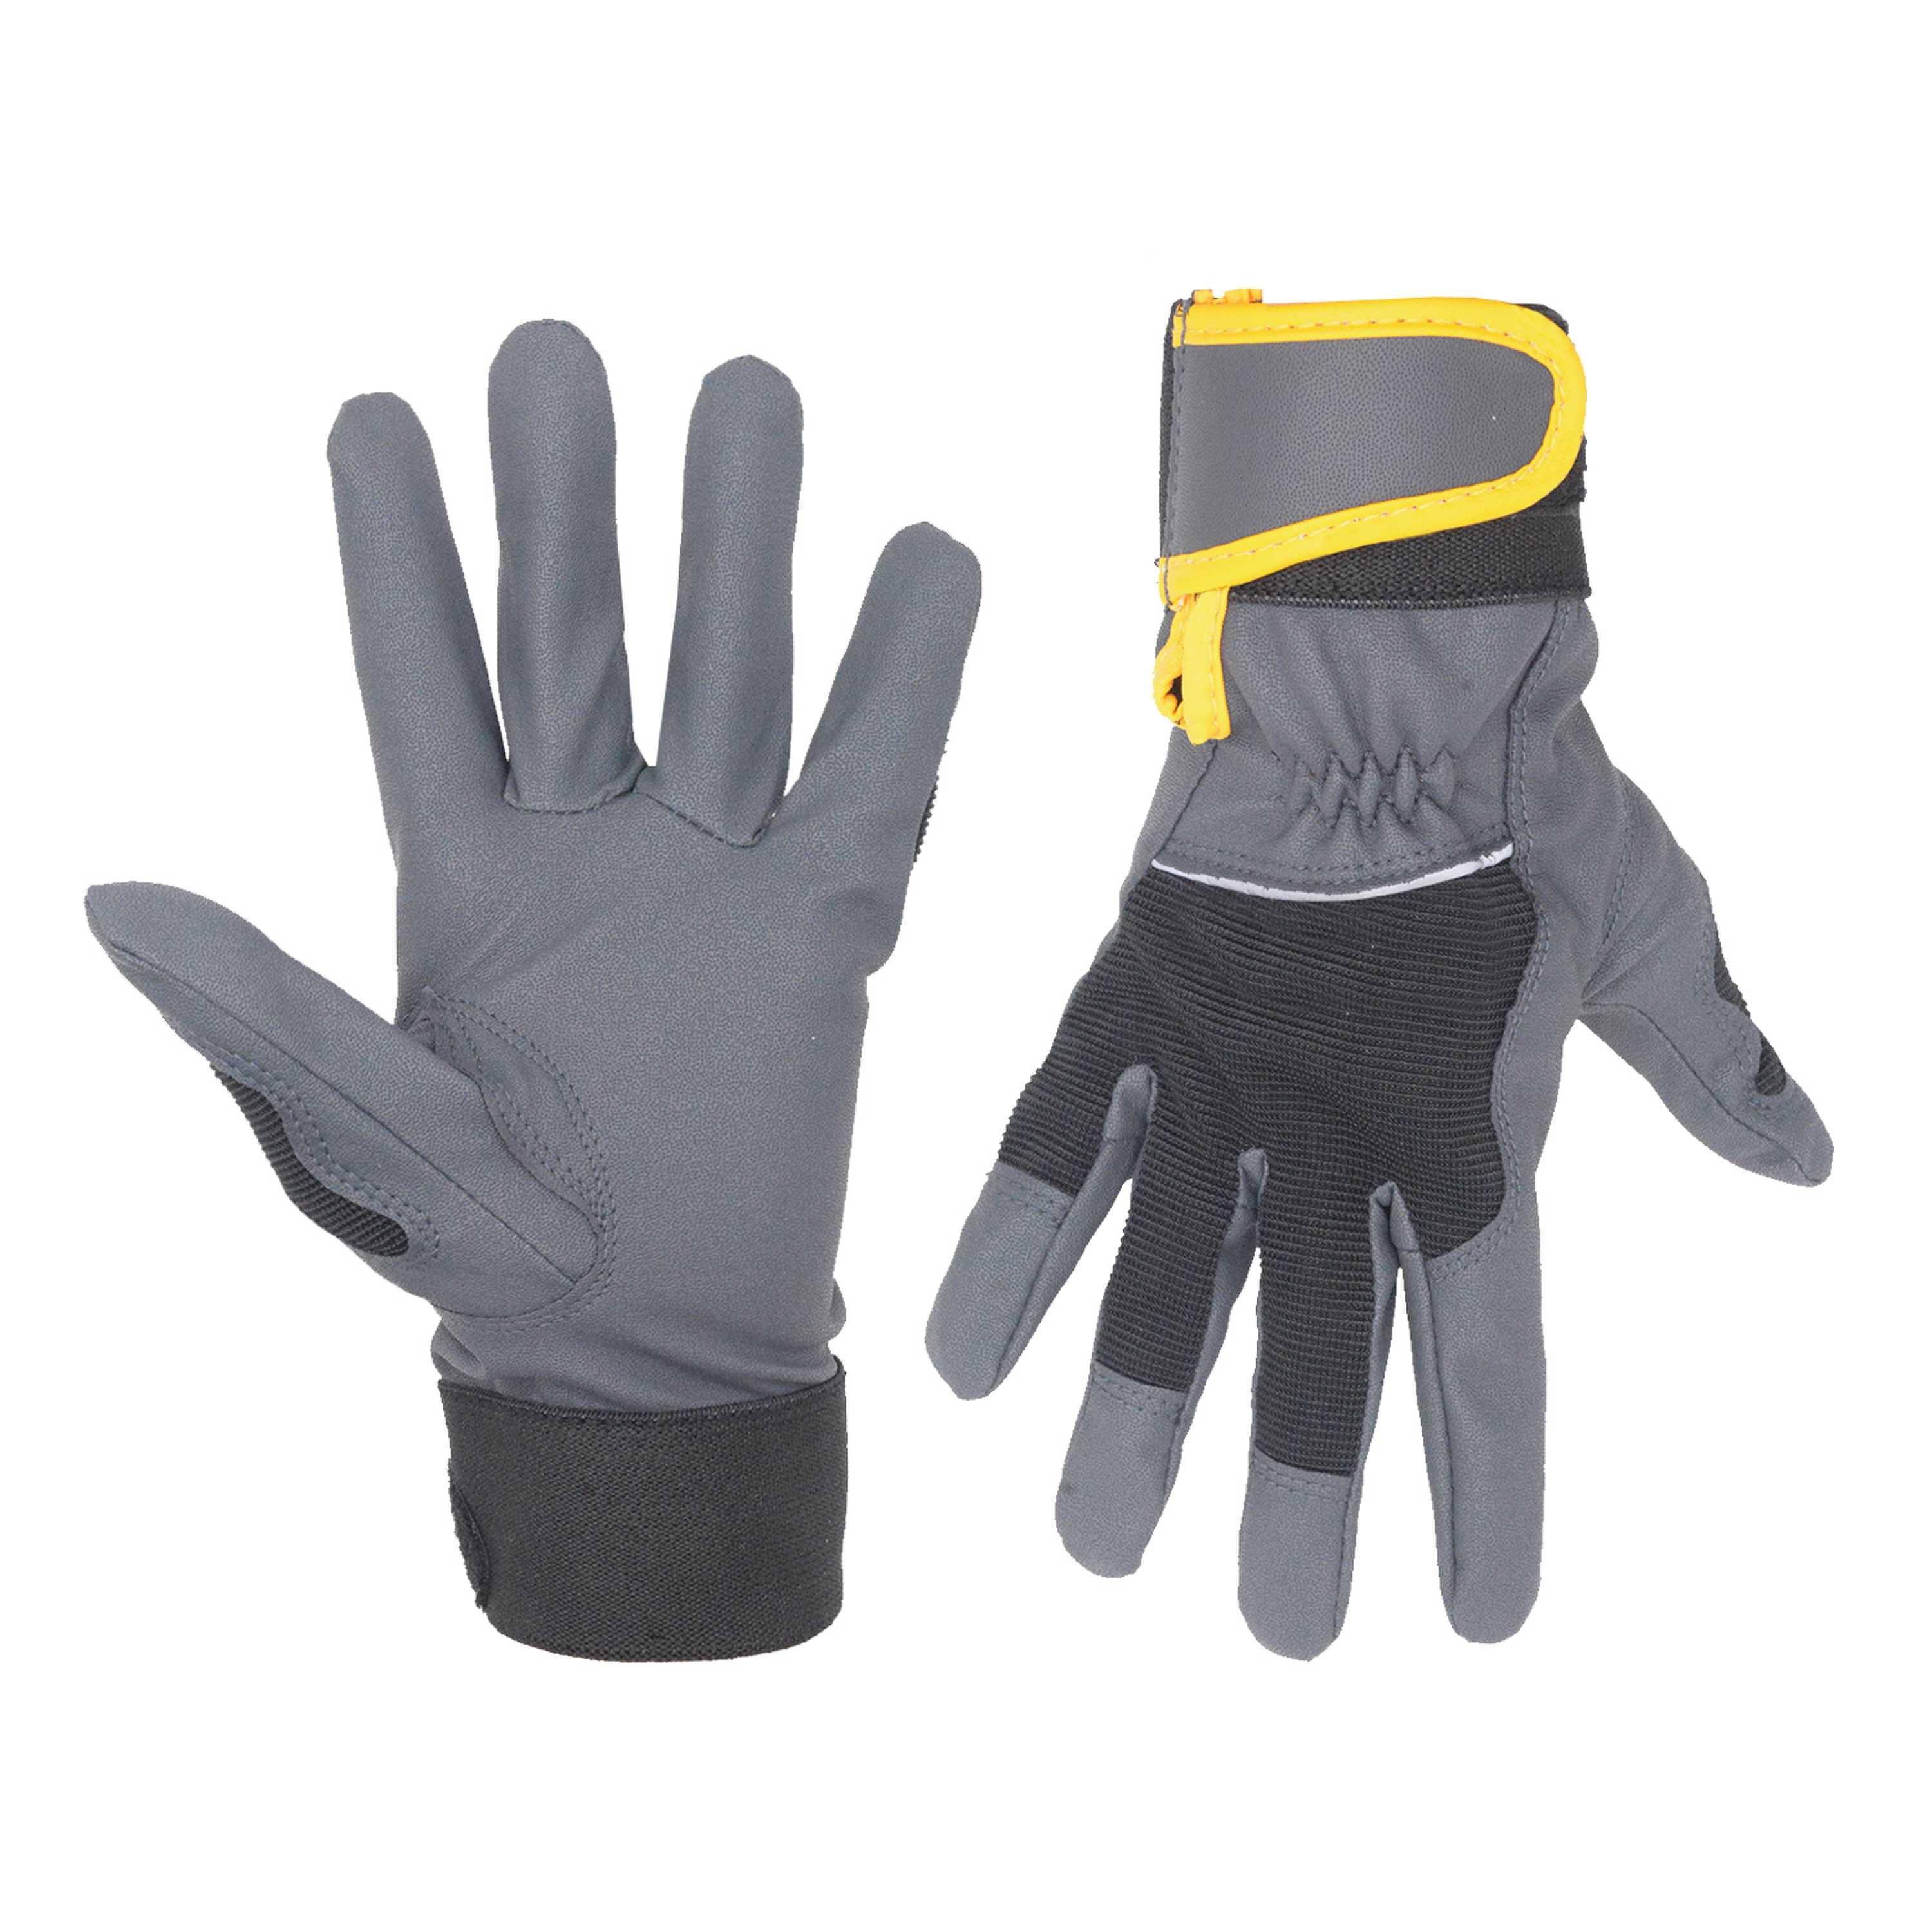 6098 PRISAFETY PU Grip Palm General Purpose Outdoor Work Sports Construction Industrial Safety Gloves